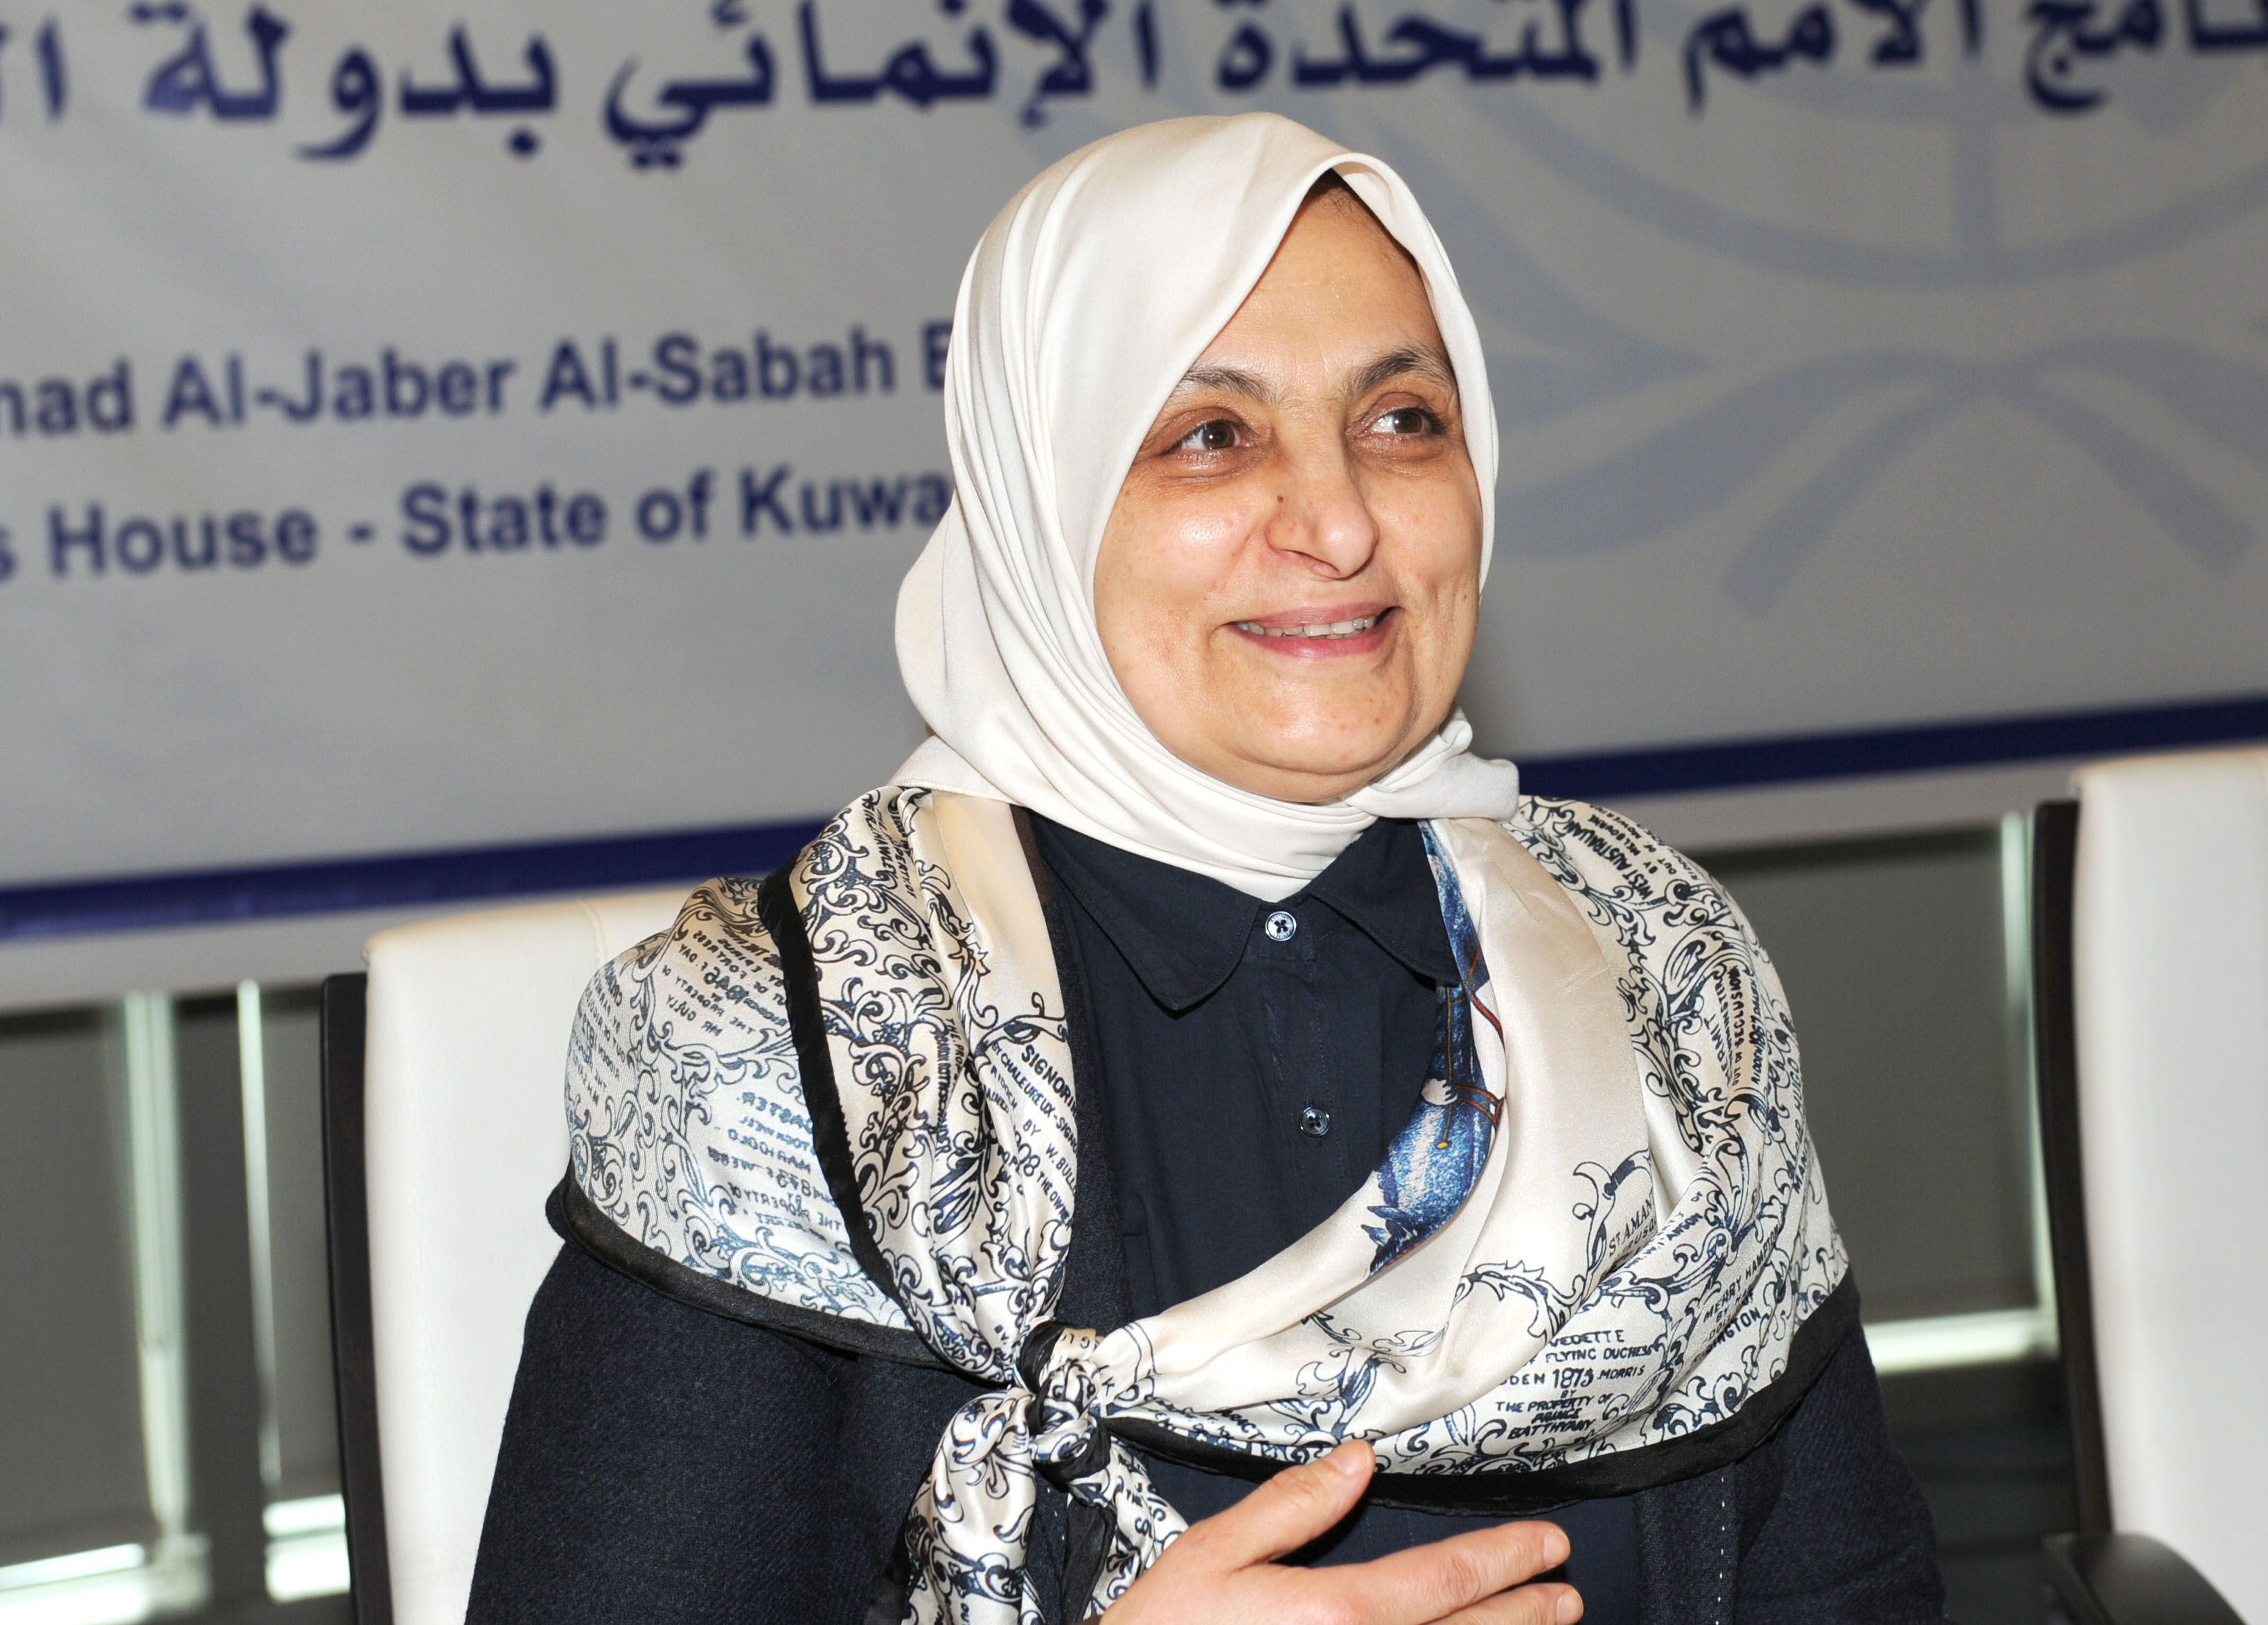 Minister of Social Affairs and Labor, Minister of State for Development and Planning Dr. Hind Al-Sabeeh